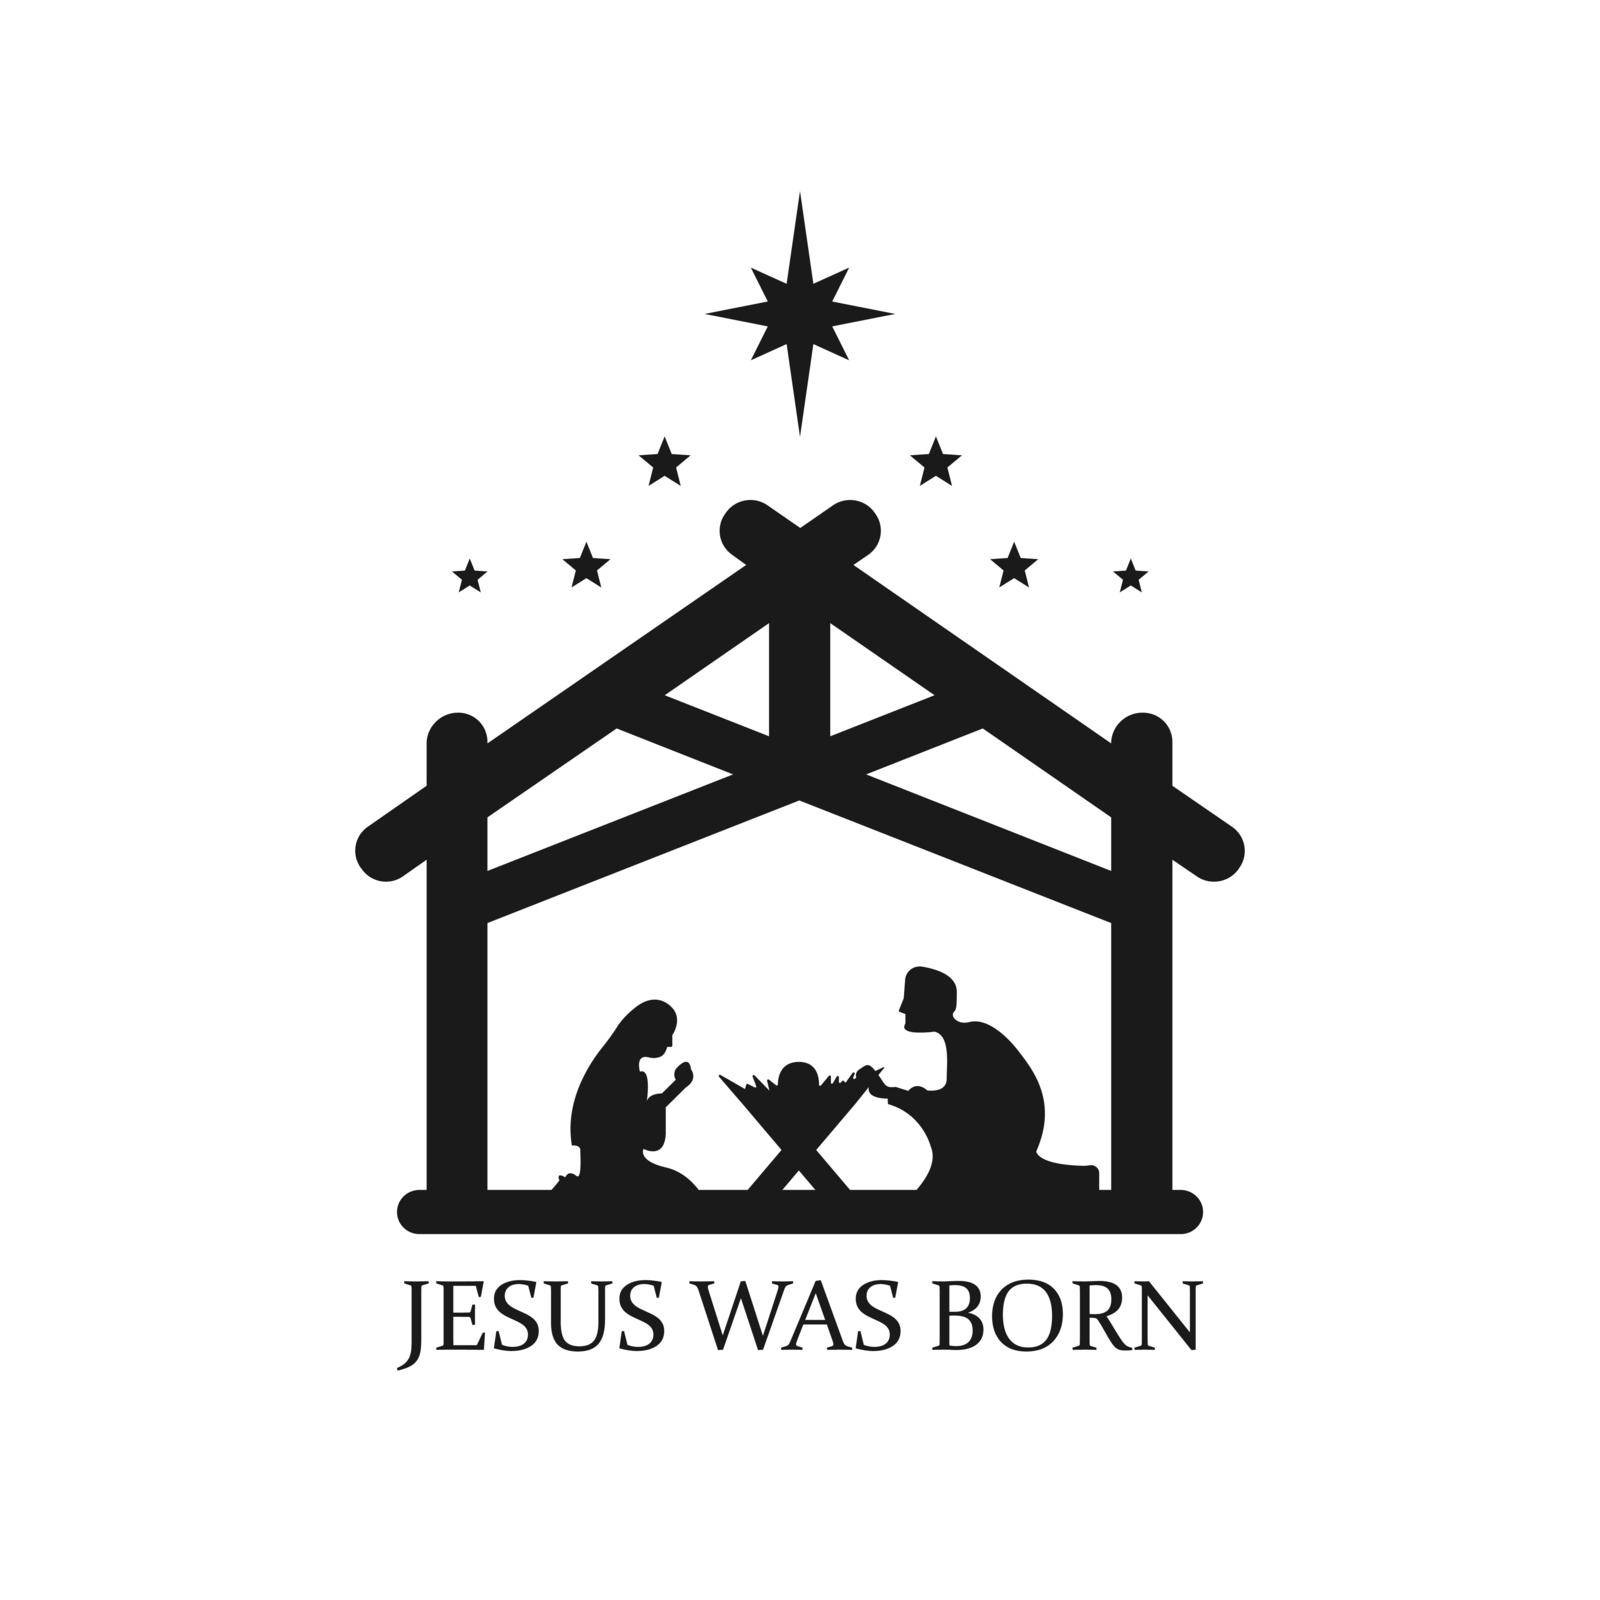 Jesus was born vector illustration. Merry Christmas logo with text isolated on white background Vector EPS 10